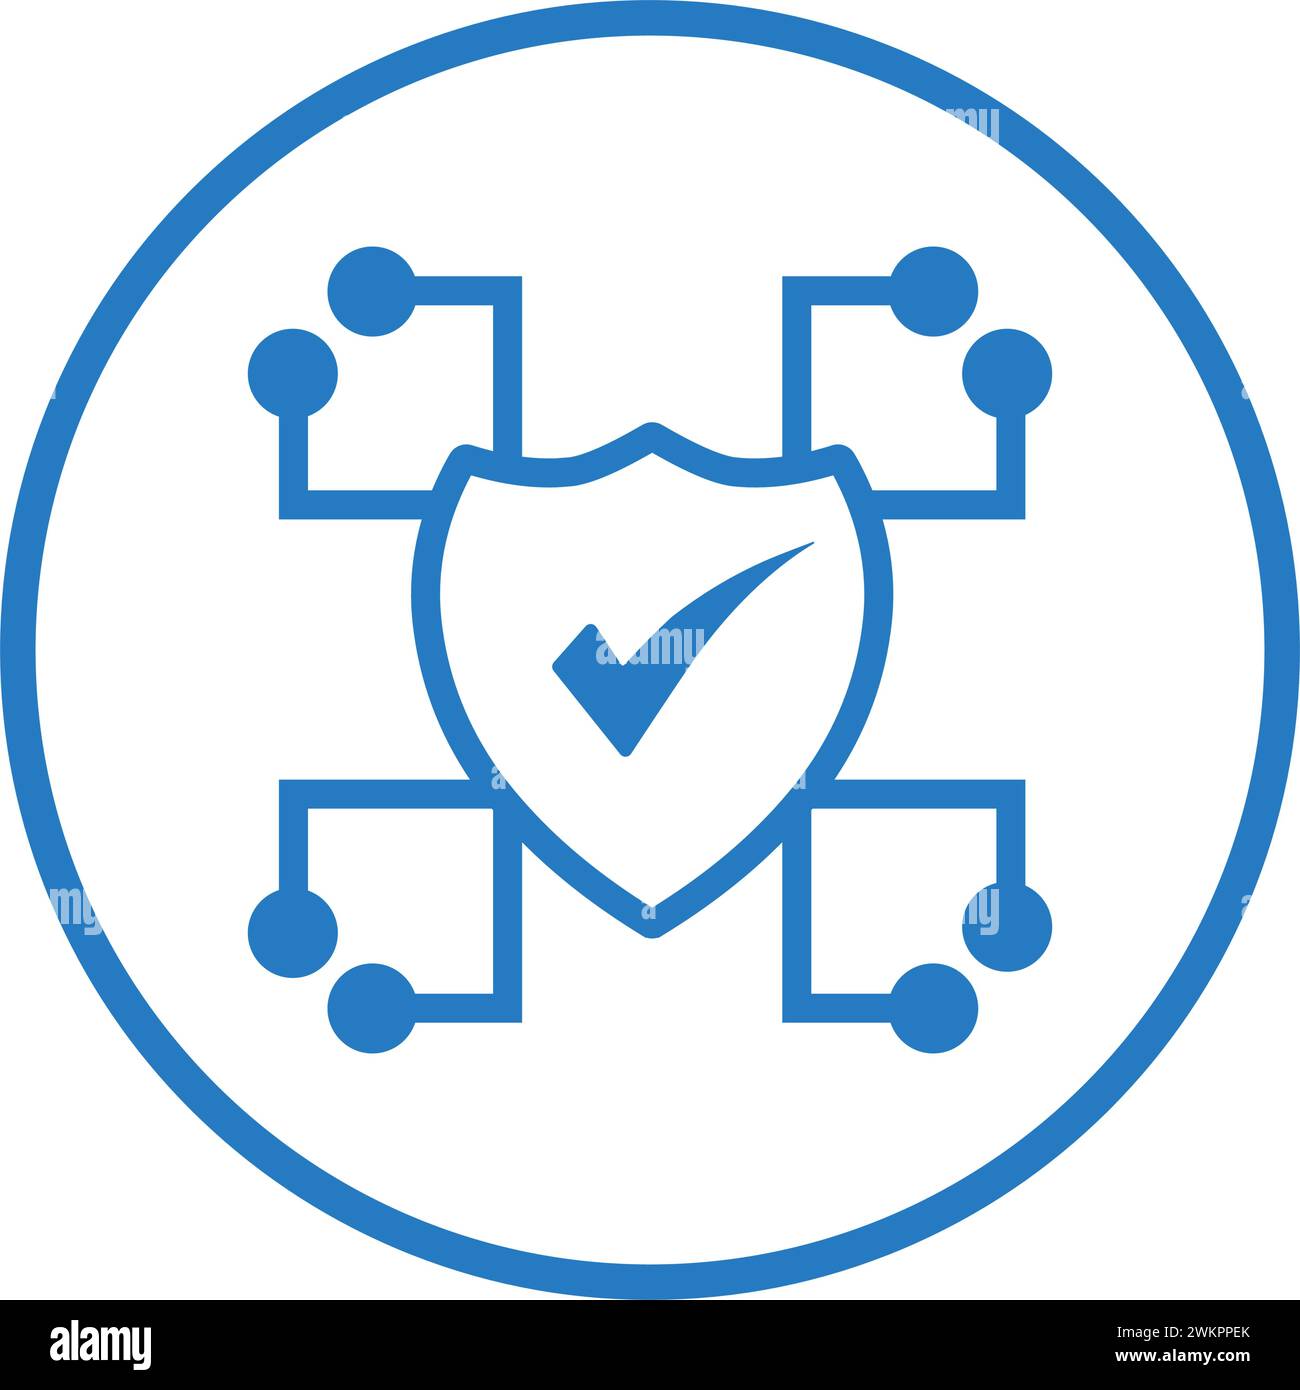 Data, security, shield icon. Simple vector illustration for web, print files, graphic or commercial purposes. Stock Vector